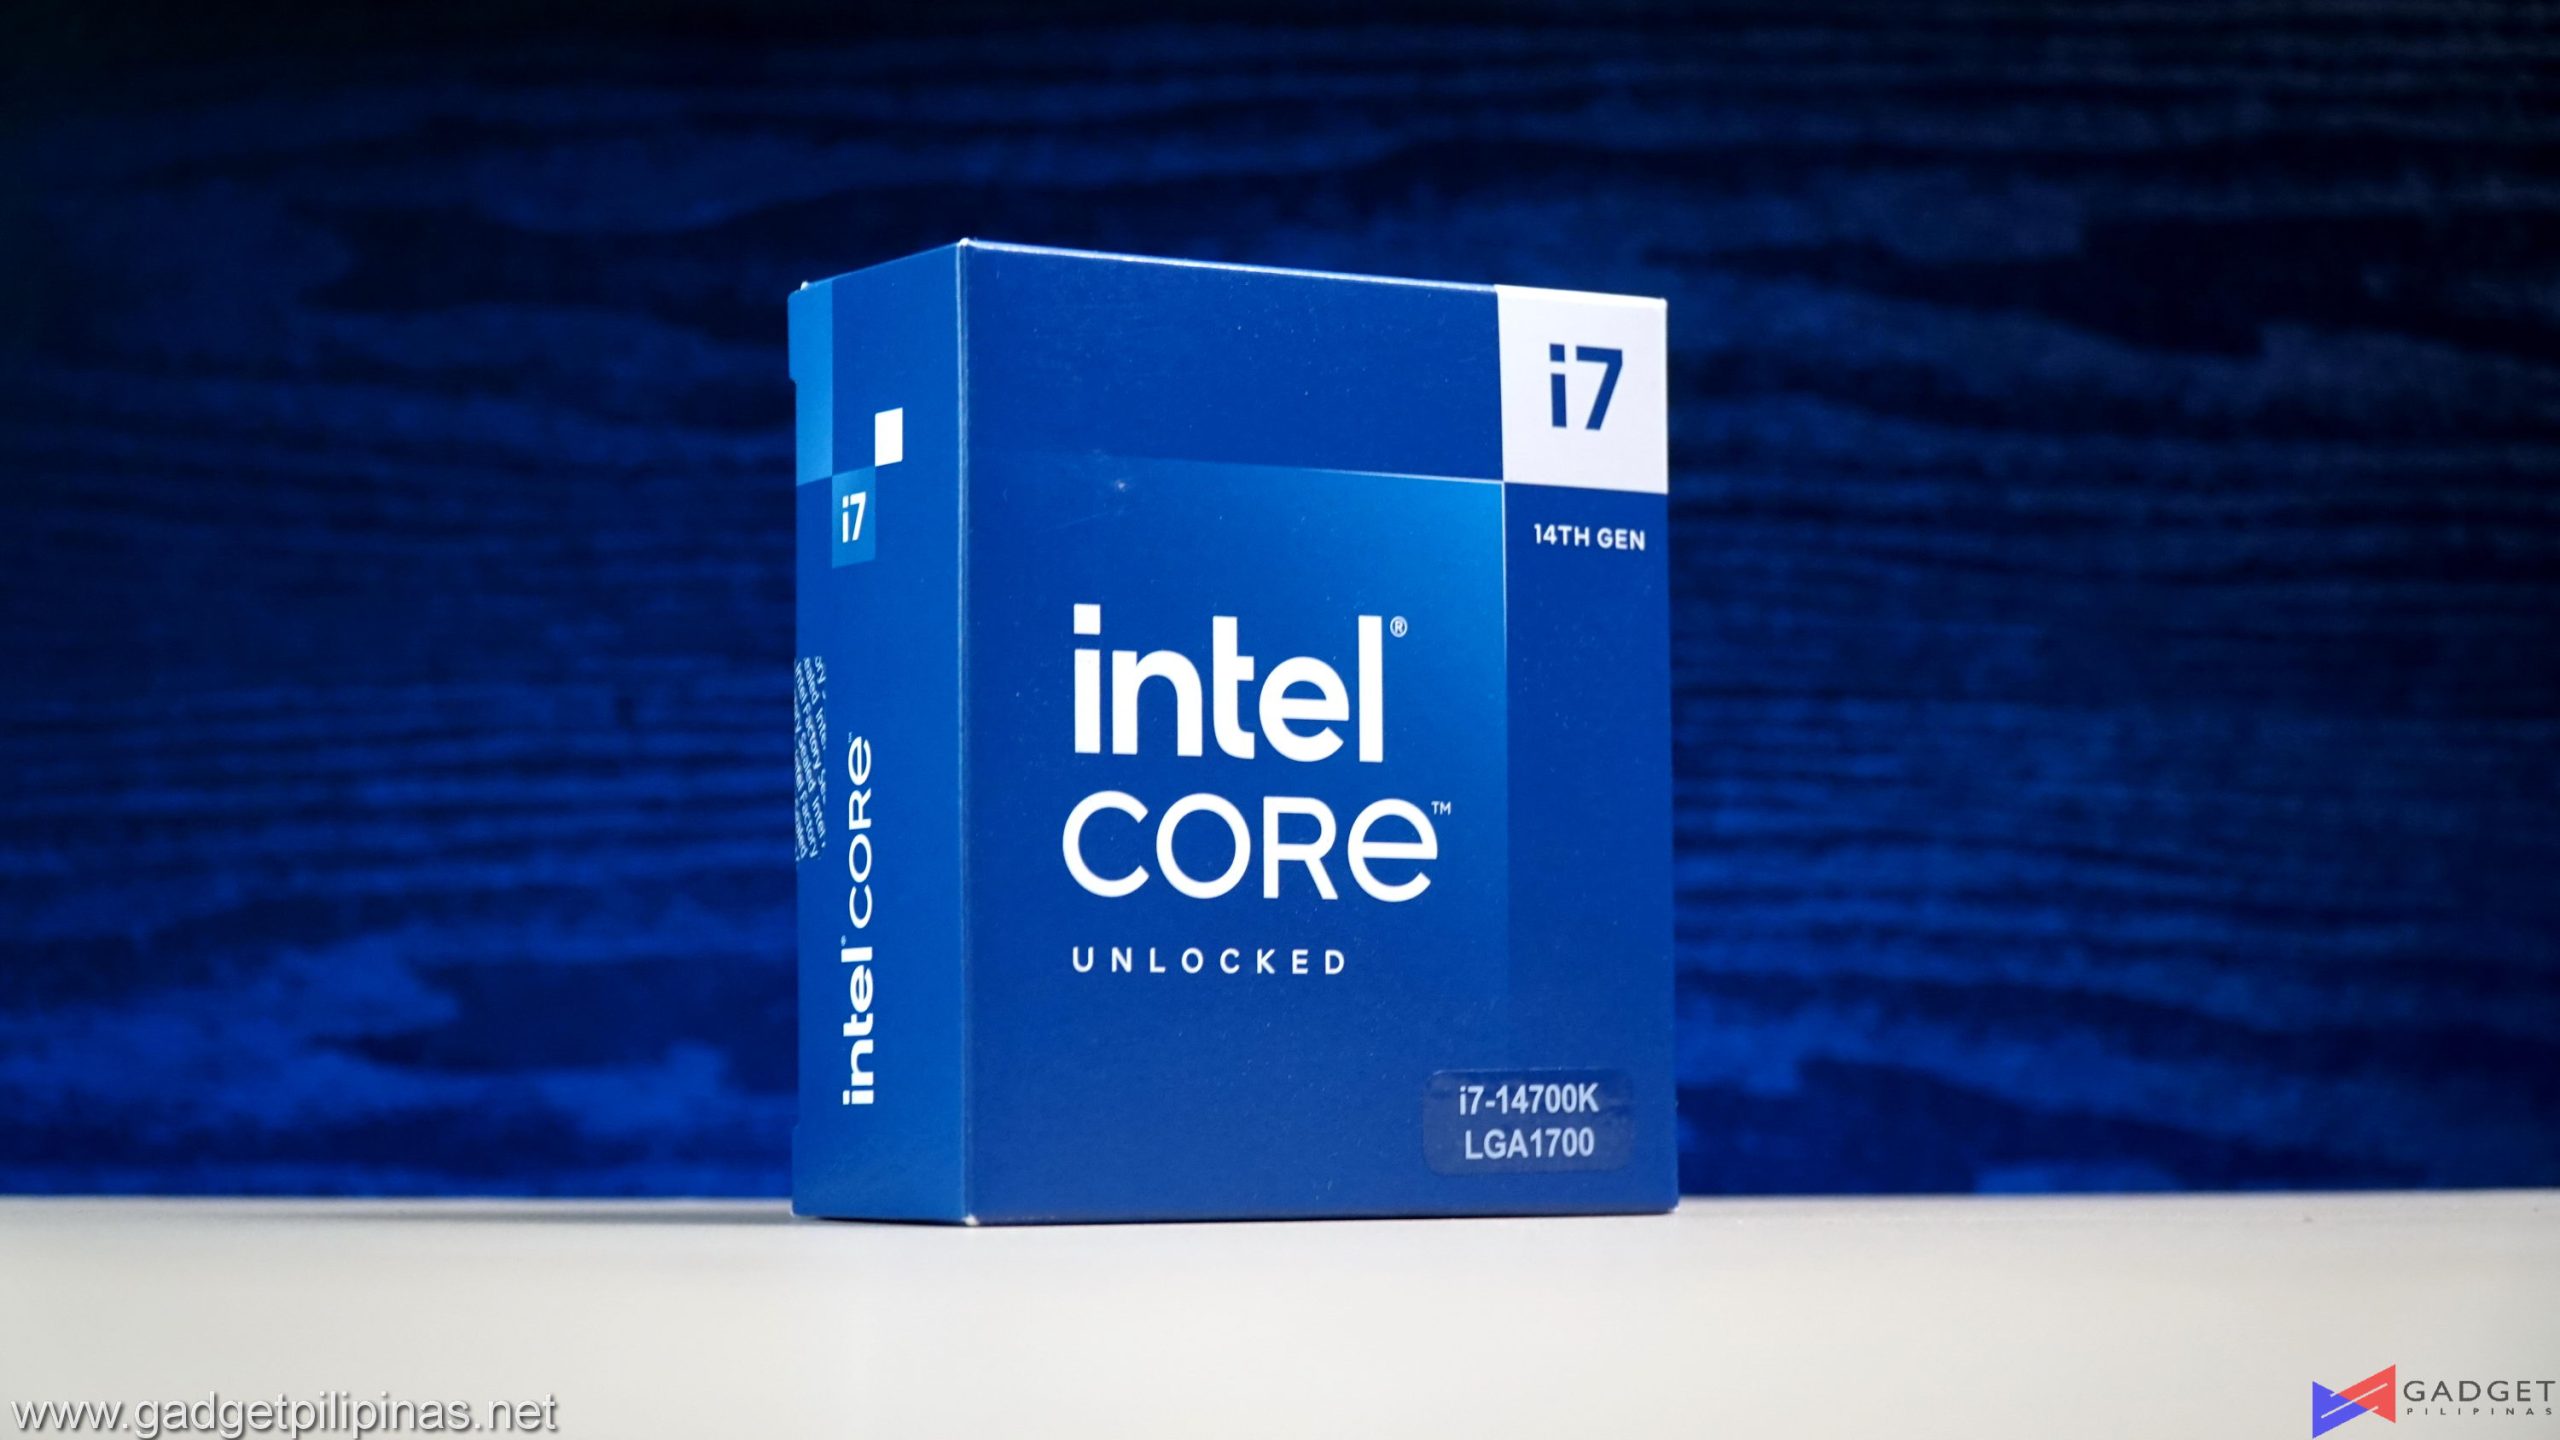 Intel Core i7 14700K Review – A Gaming and Productivity Flagship CPU